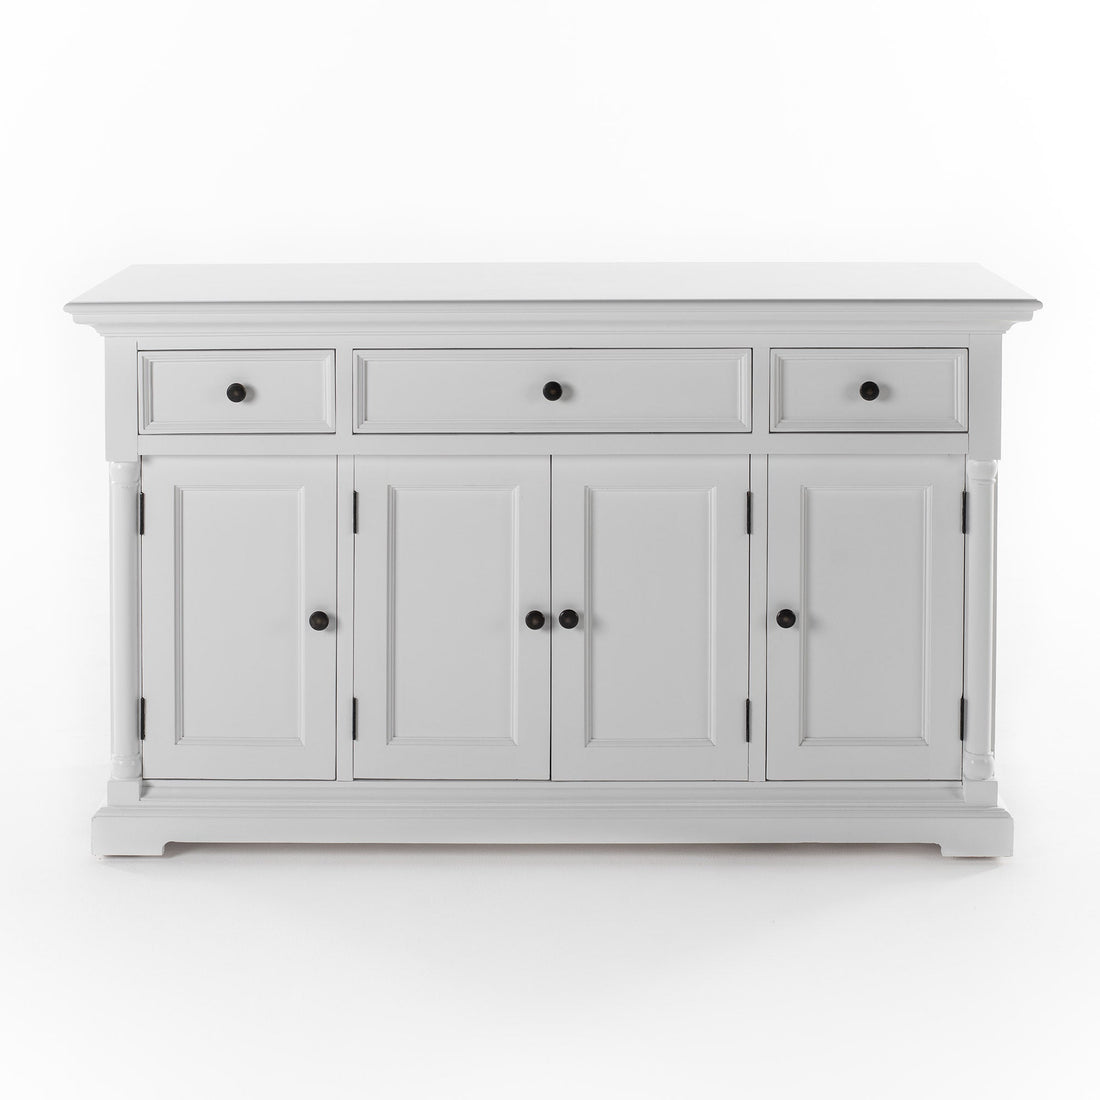 Provence sideboard with 4 doors and 3 drawers